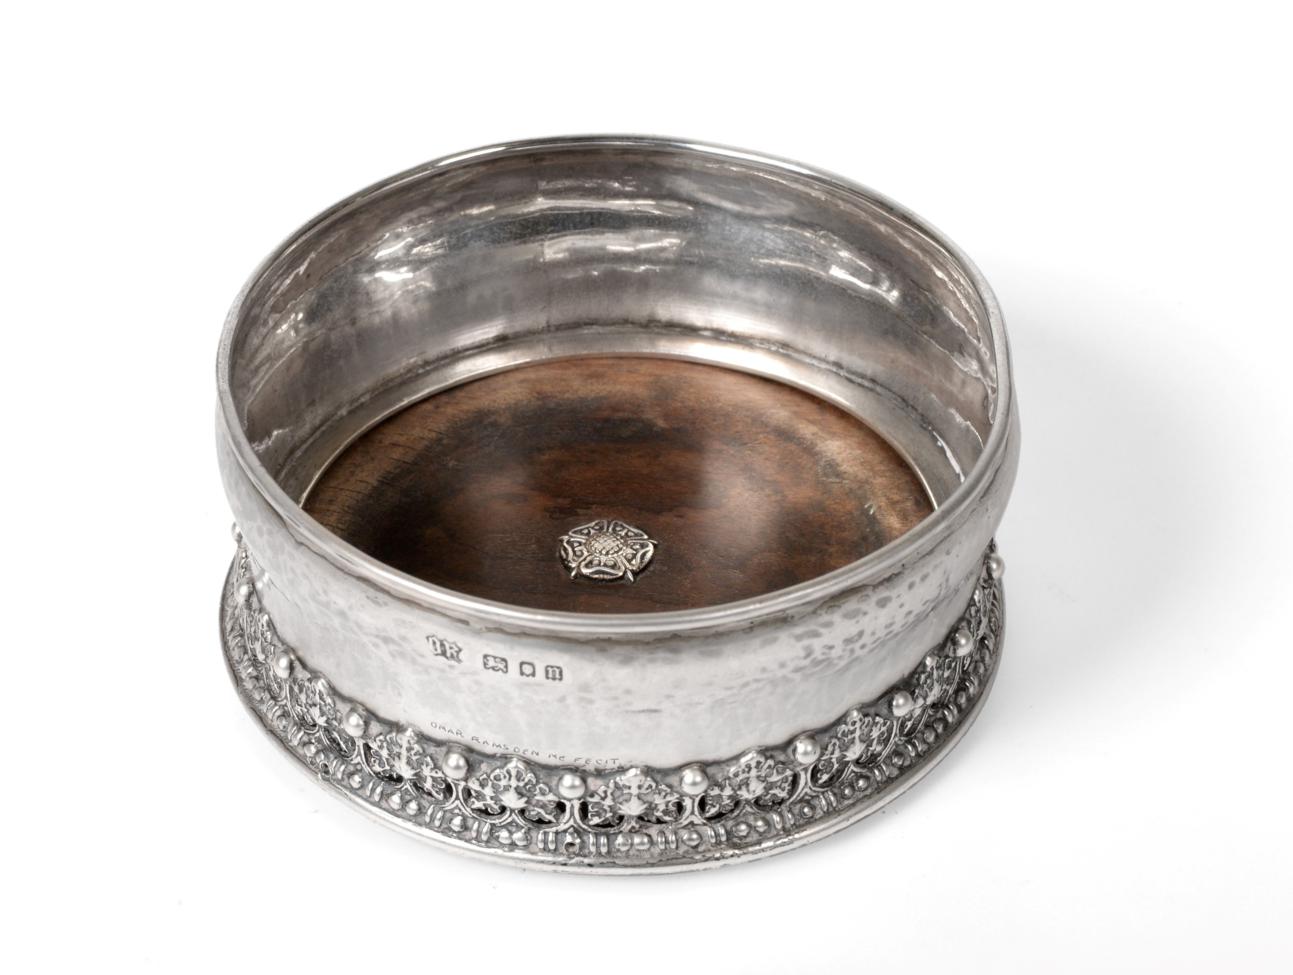 Lot 509 - An Arts & Crafts Silver Wine Coaster, Omar Ramsden, London 1928, with spot-hammered finish and...